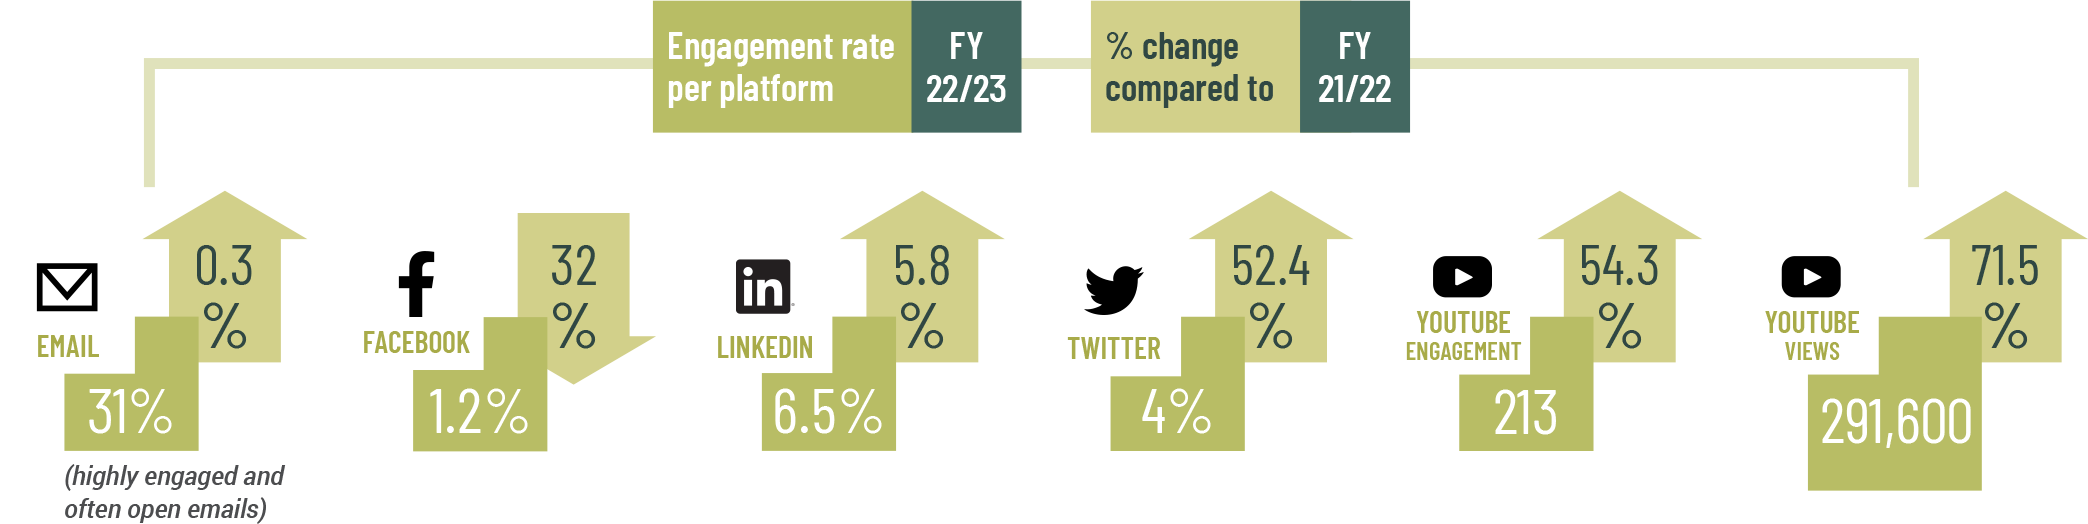 Engagement rate per platform – FY22/23 (% change compared to FY 21-22) Email: 31% (+0.3%) Facebook:1.2%(+32%) LinkedIn:6.5%(+5.8%) Twitter:4%(+52.4%) Youtube engagement:213(+54.3%) Youtube views:291,600(+71.5%)